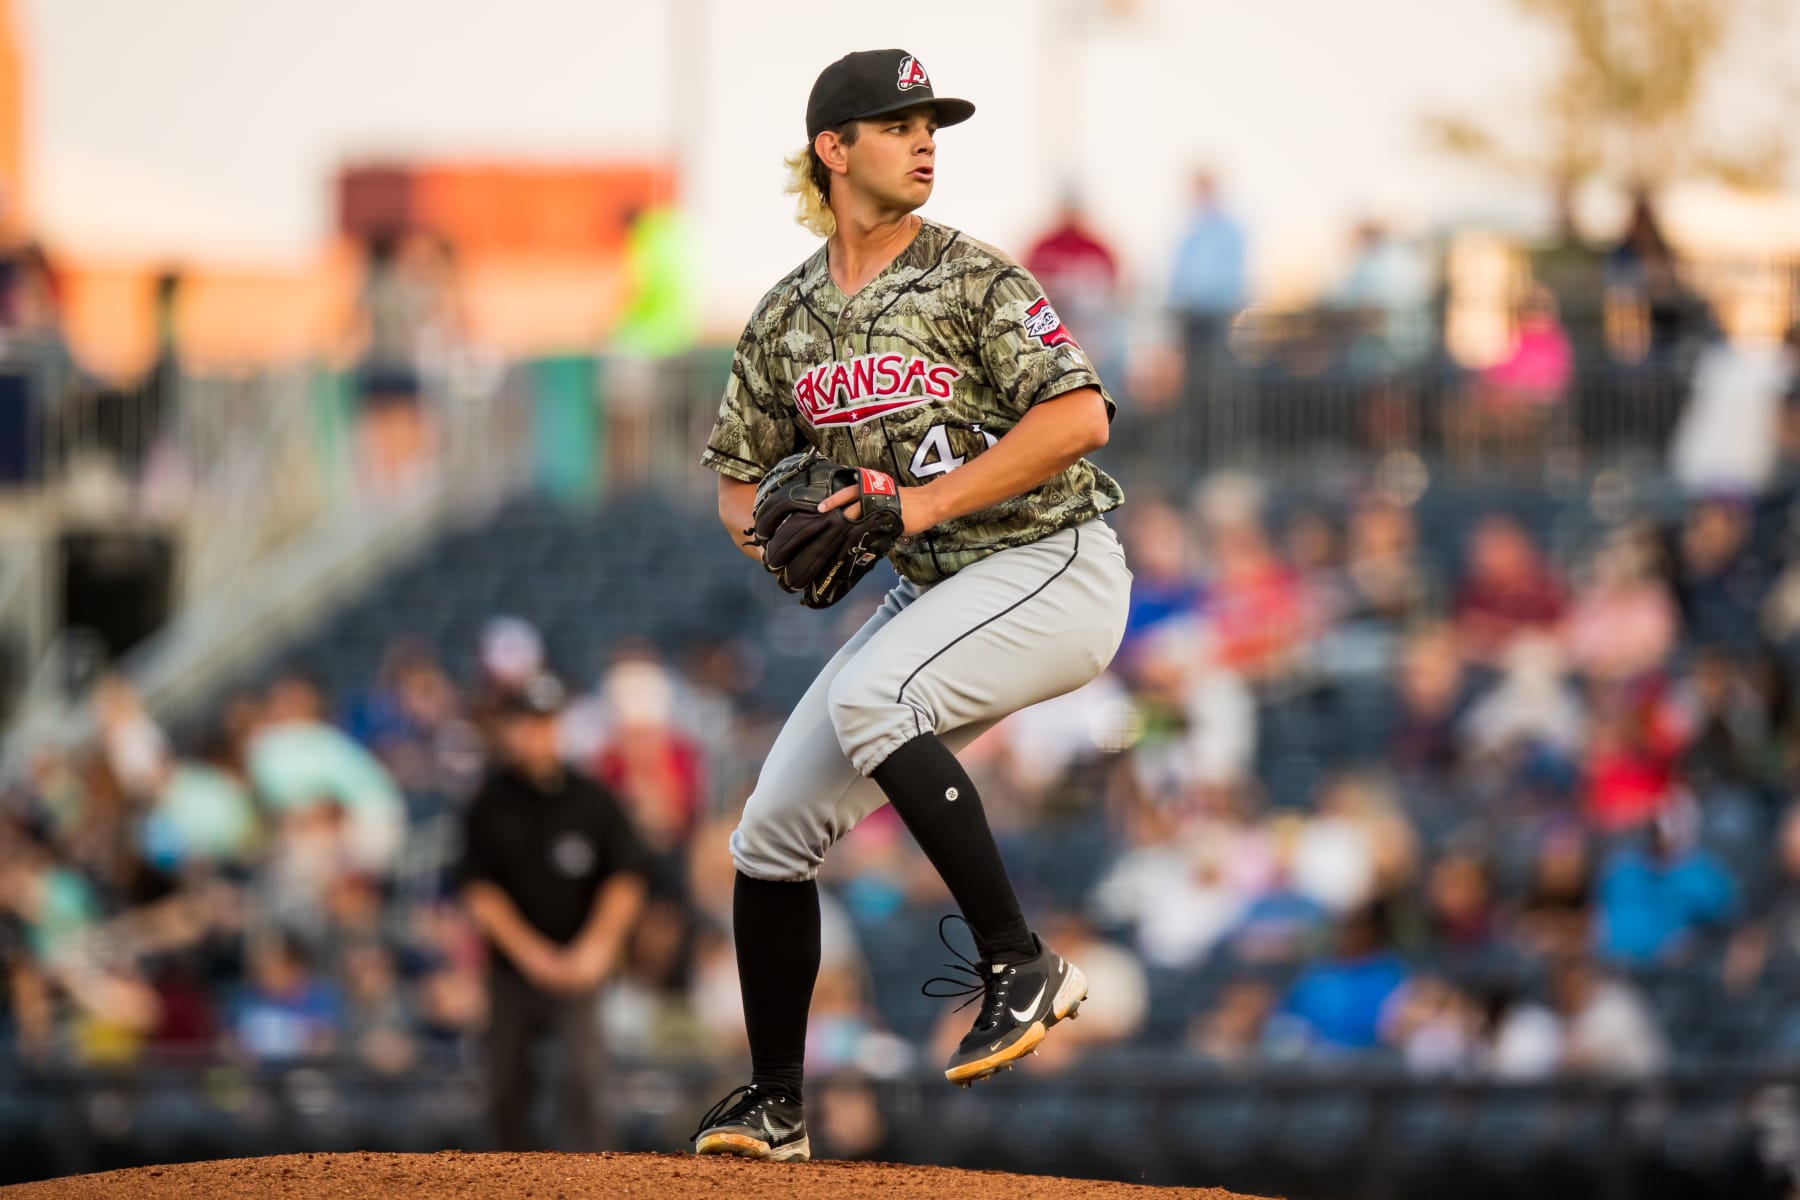 Phillies prospect watch: Justin Crawford, Mick Abel are hot, Scott